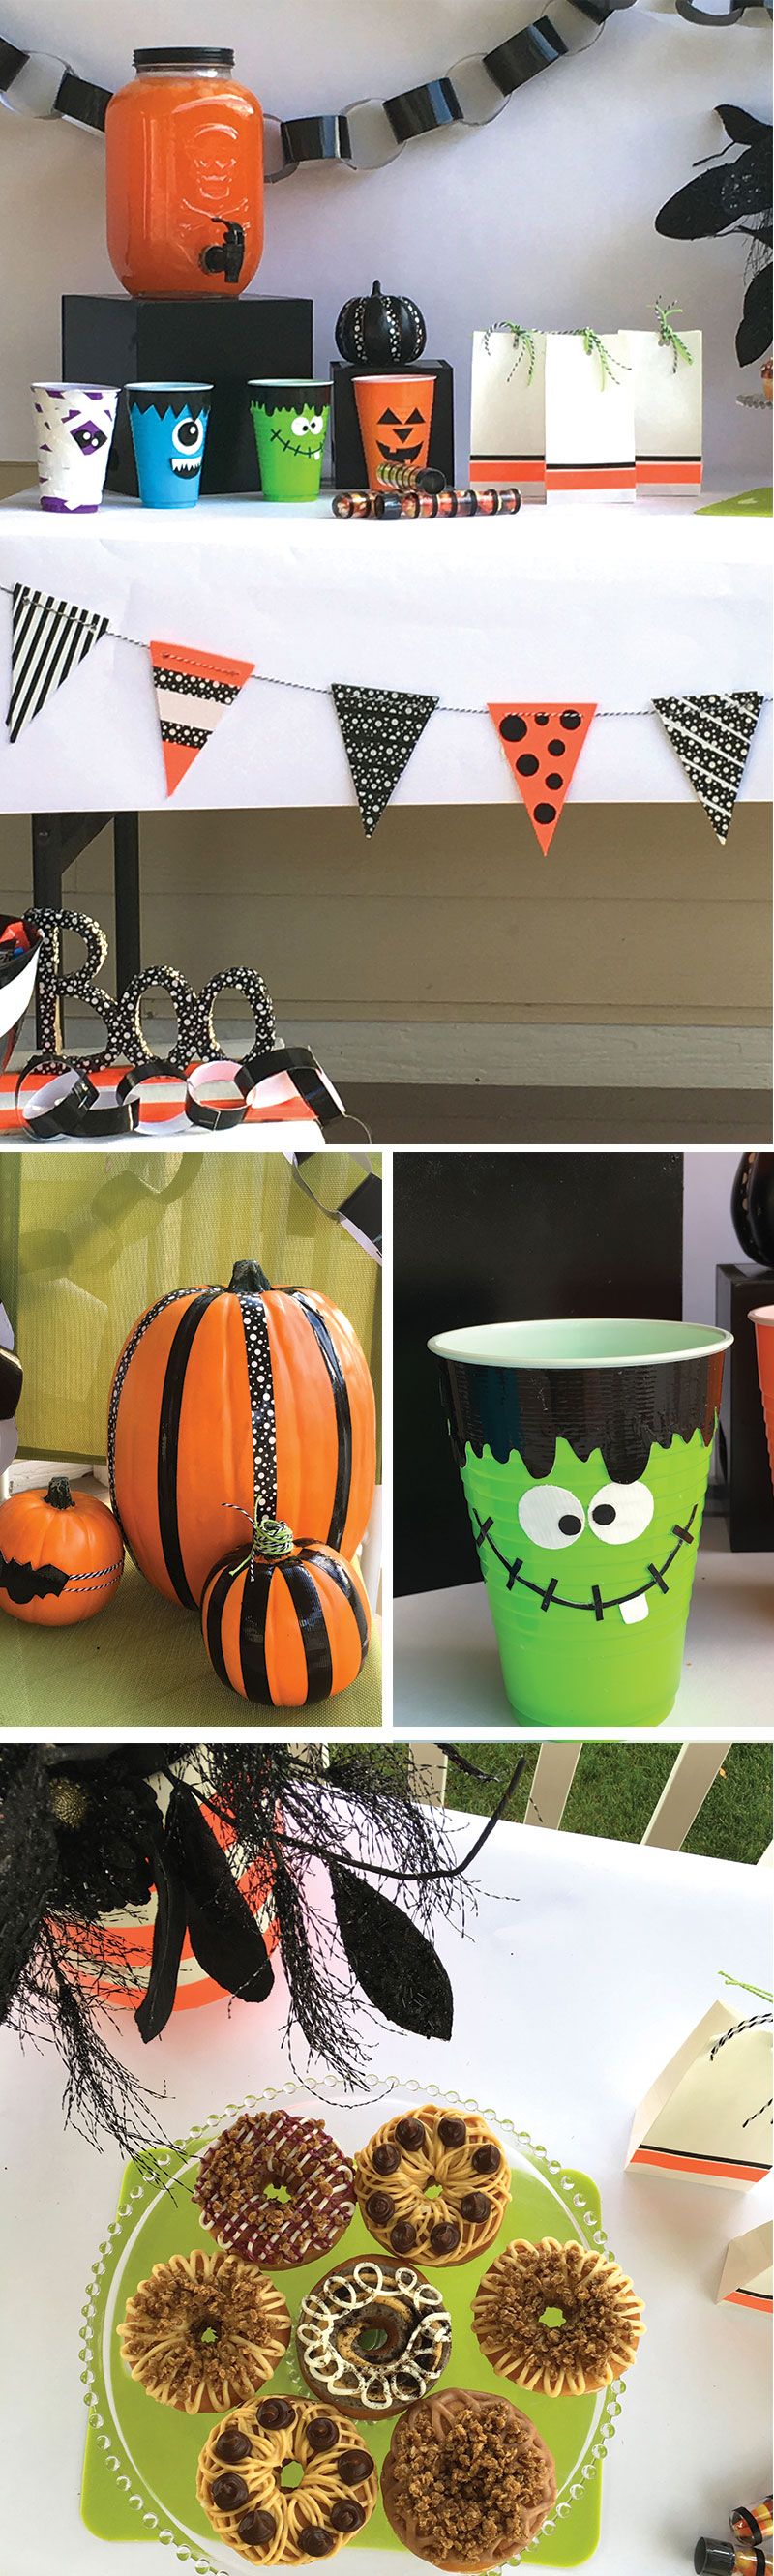 5 Simple Ways to Decorate for your Halloween Party